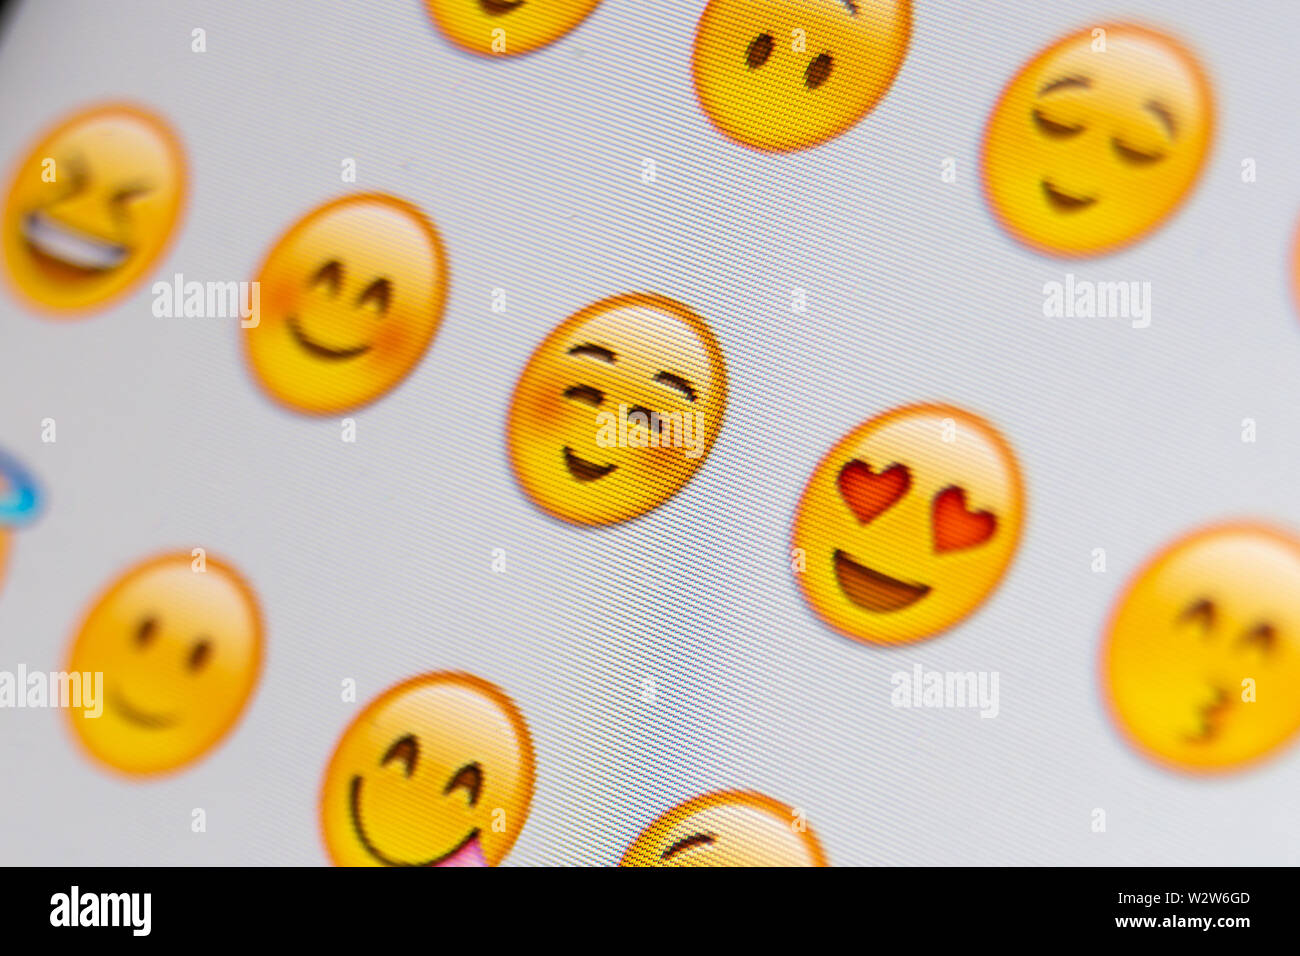 Close up of some emoji characters on a phone Stock Photo